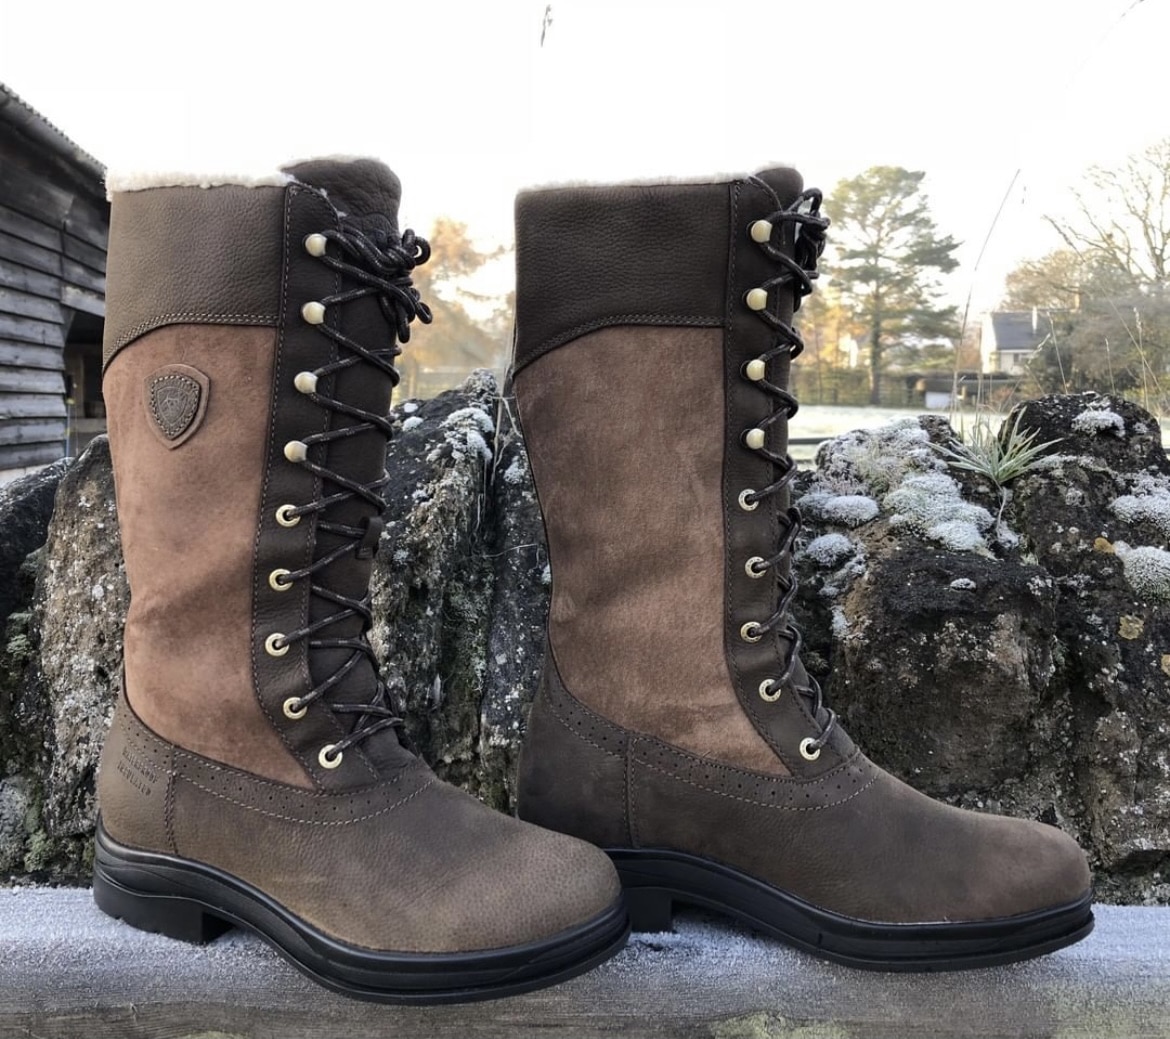 Ariat Winter Boots Factory Sale | head.hesge.ch